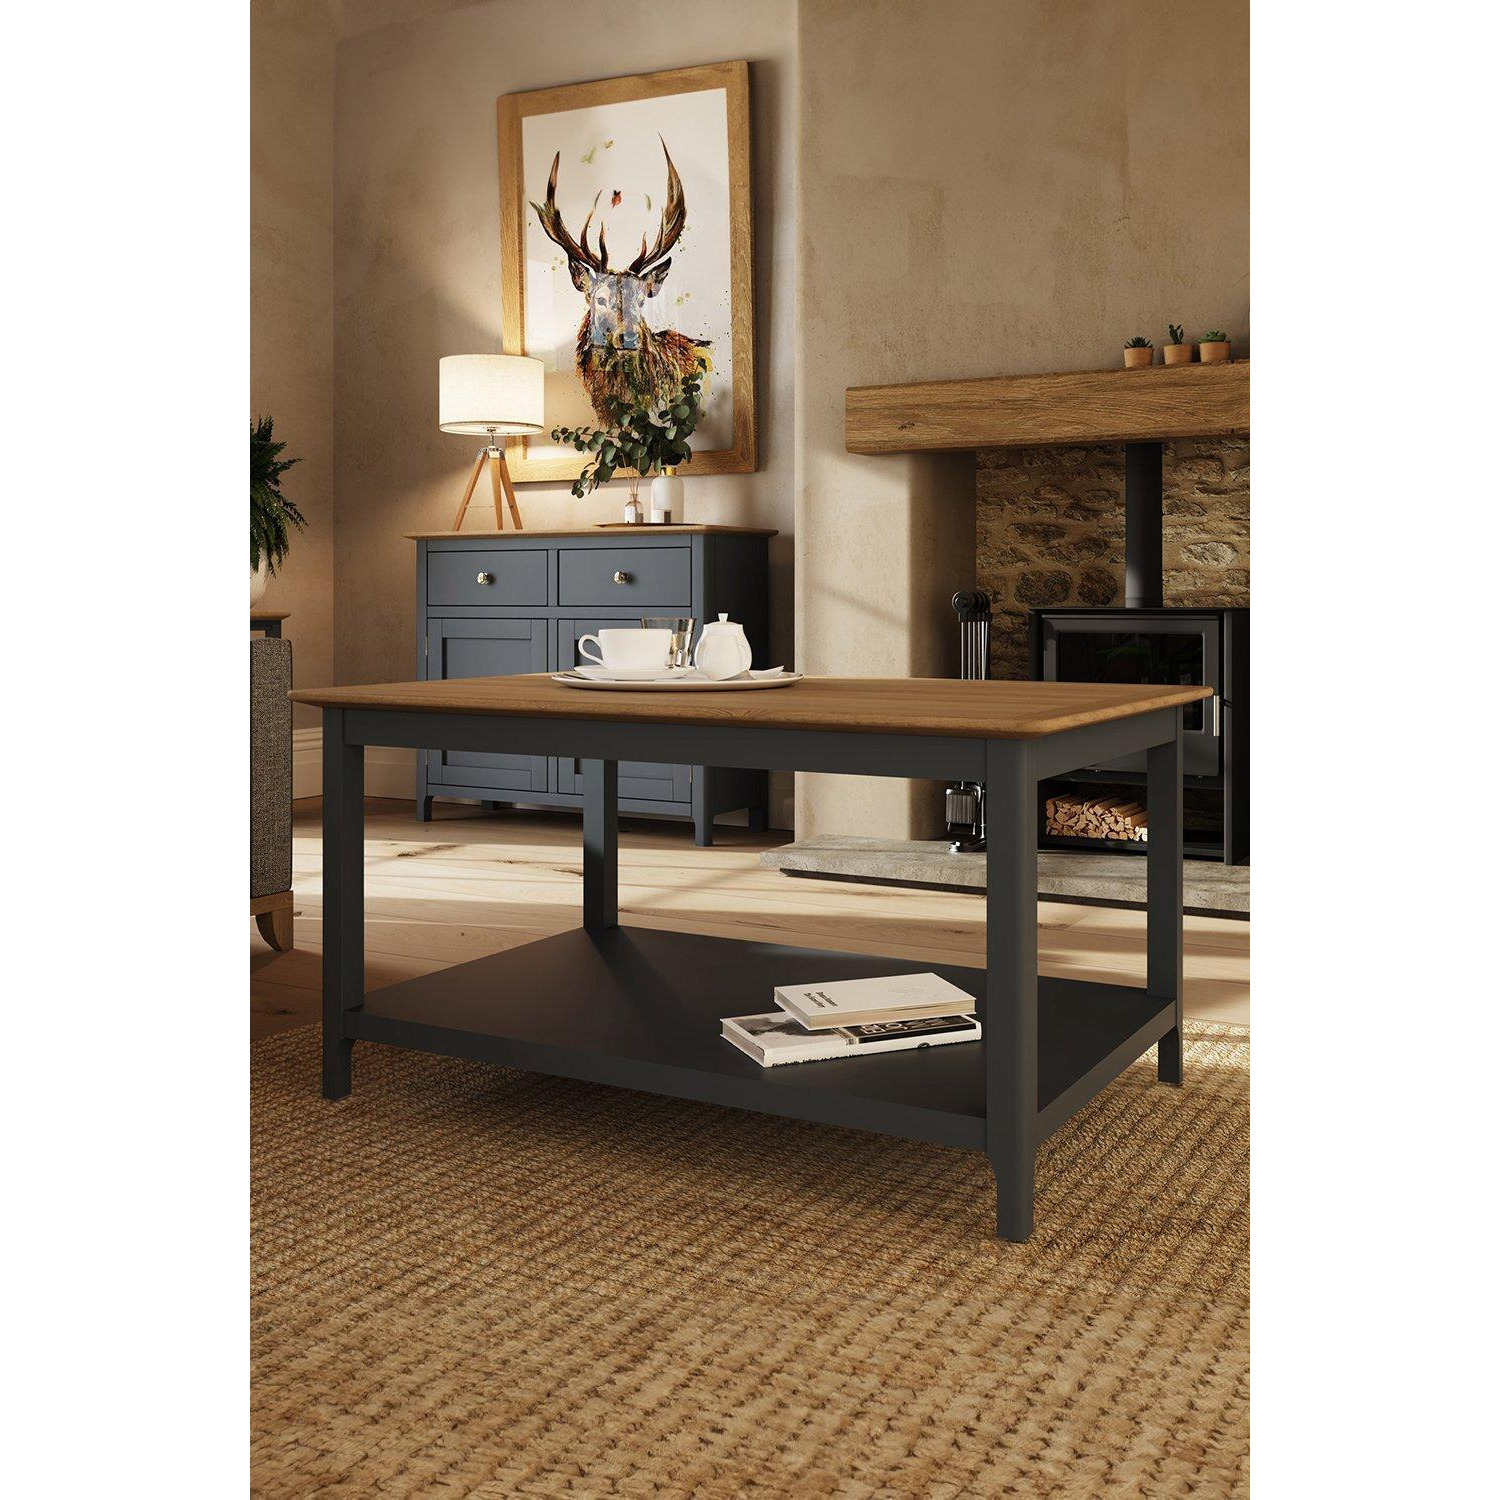 Large Graphite Blue Painted Oak Storage Coffee Table - image 1